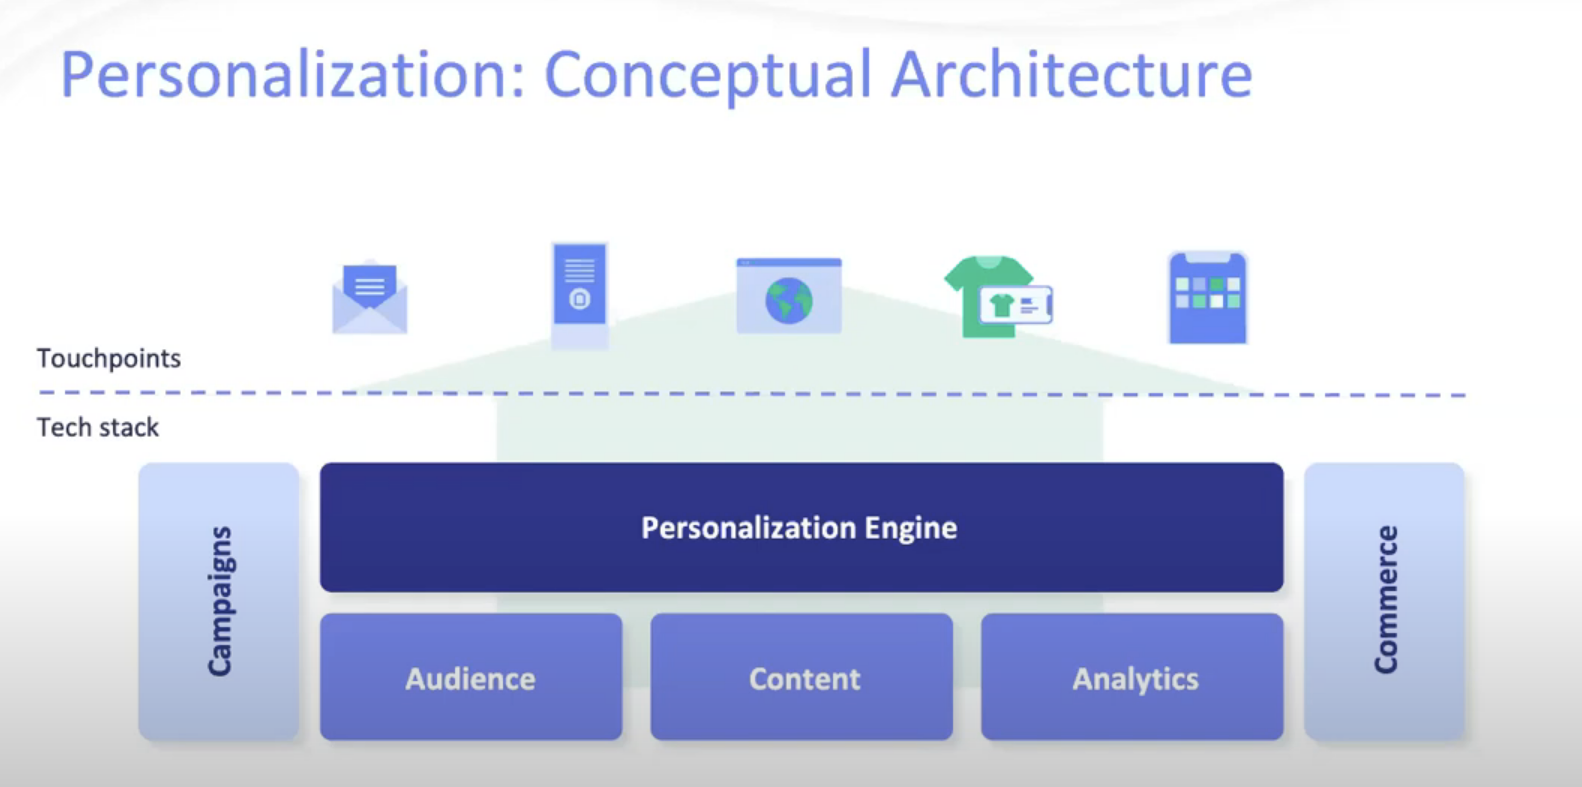 Caption: These are the key components needed for personalization whether you choose a suite or stack approach.